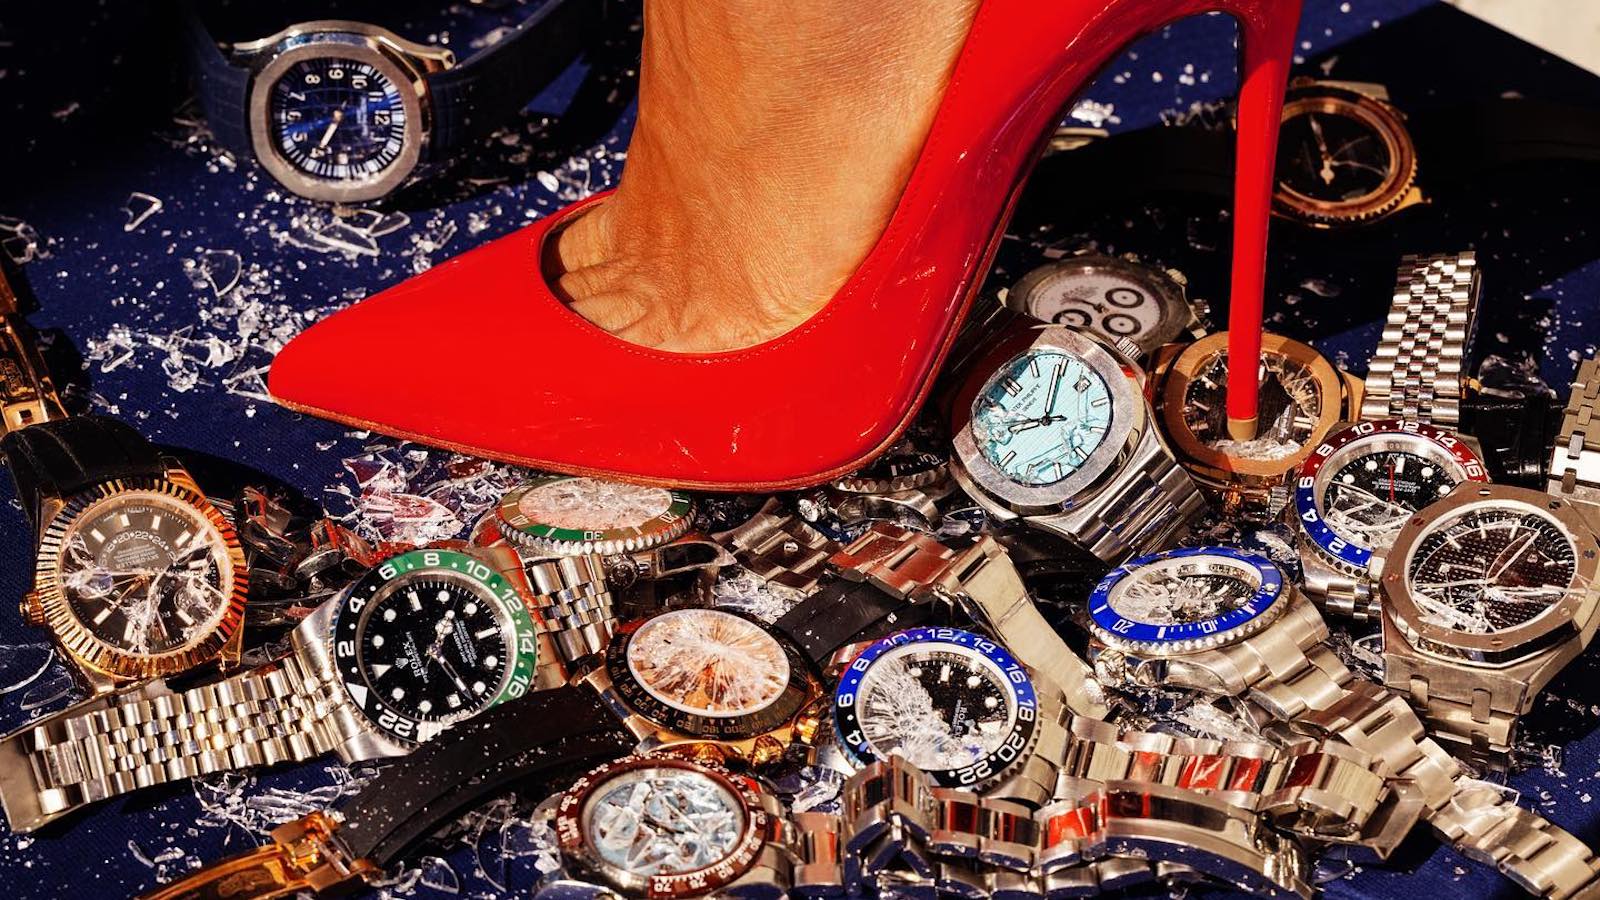 Artist Destroys Hundreds Of Rolex Watches For Controversial Art Piece